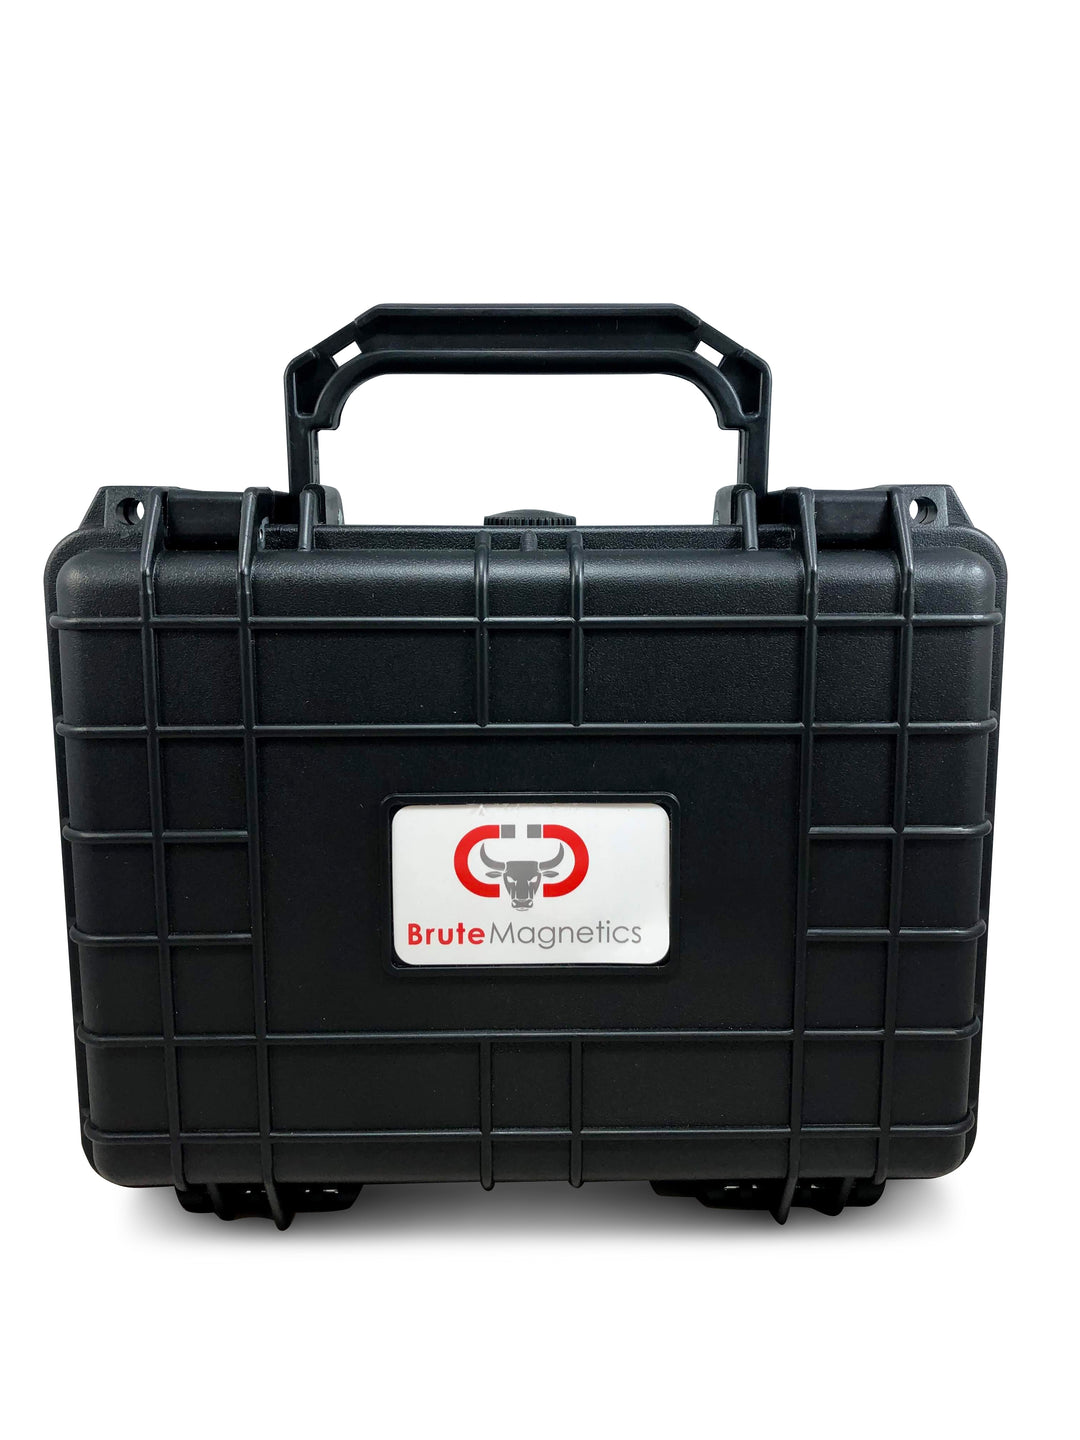 Brute Magnetics, Carrying Case, Outside View